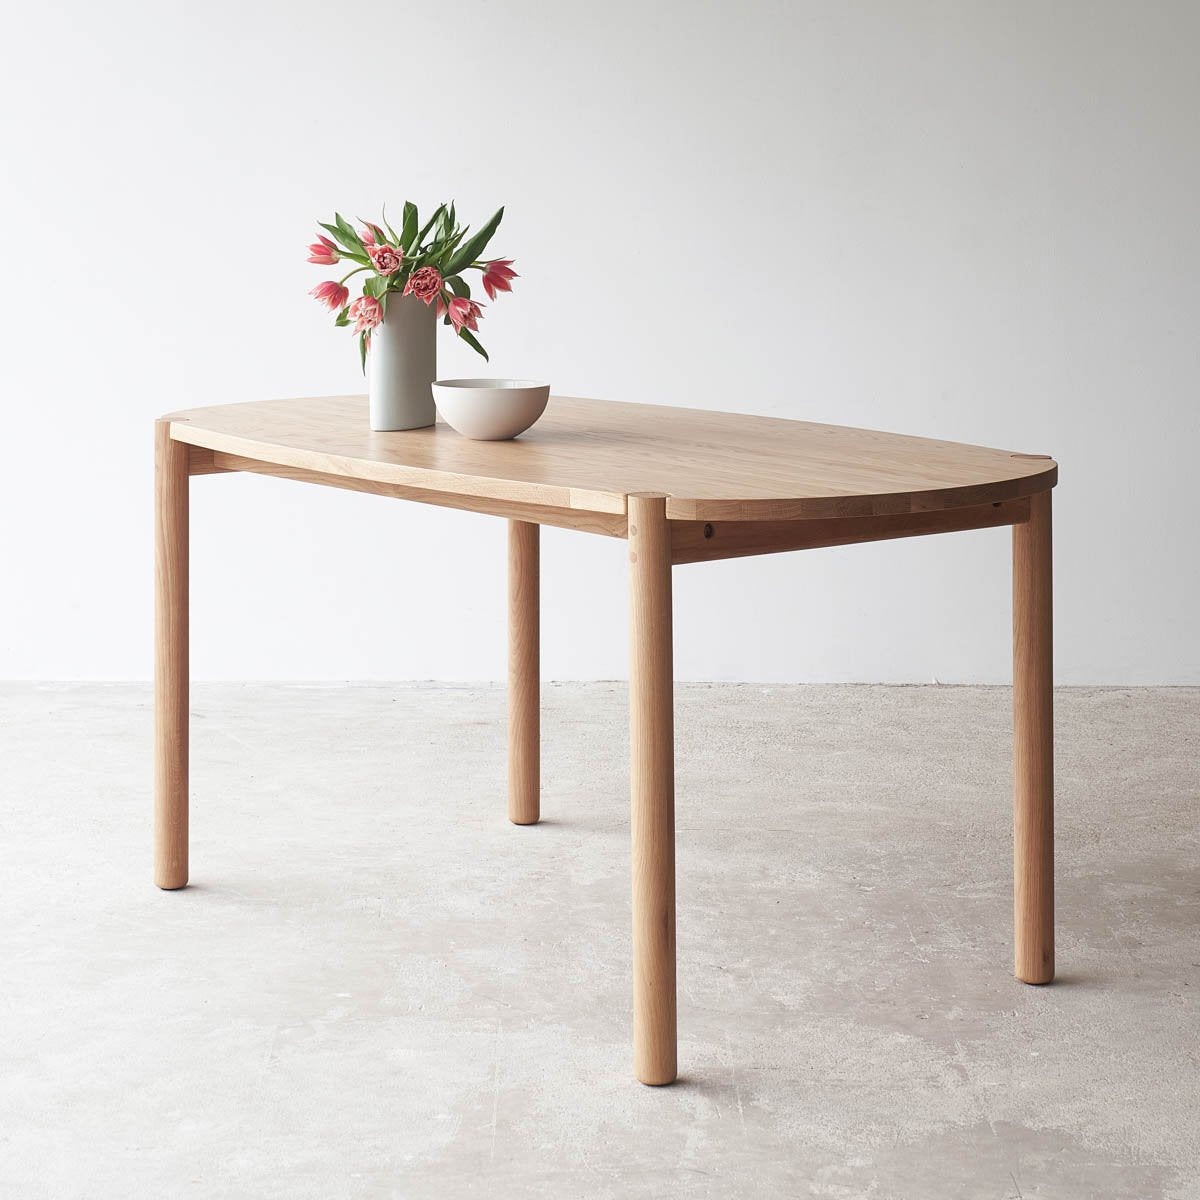 COVE TABLE